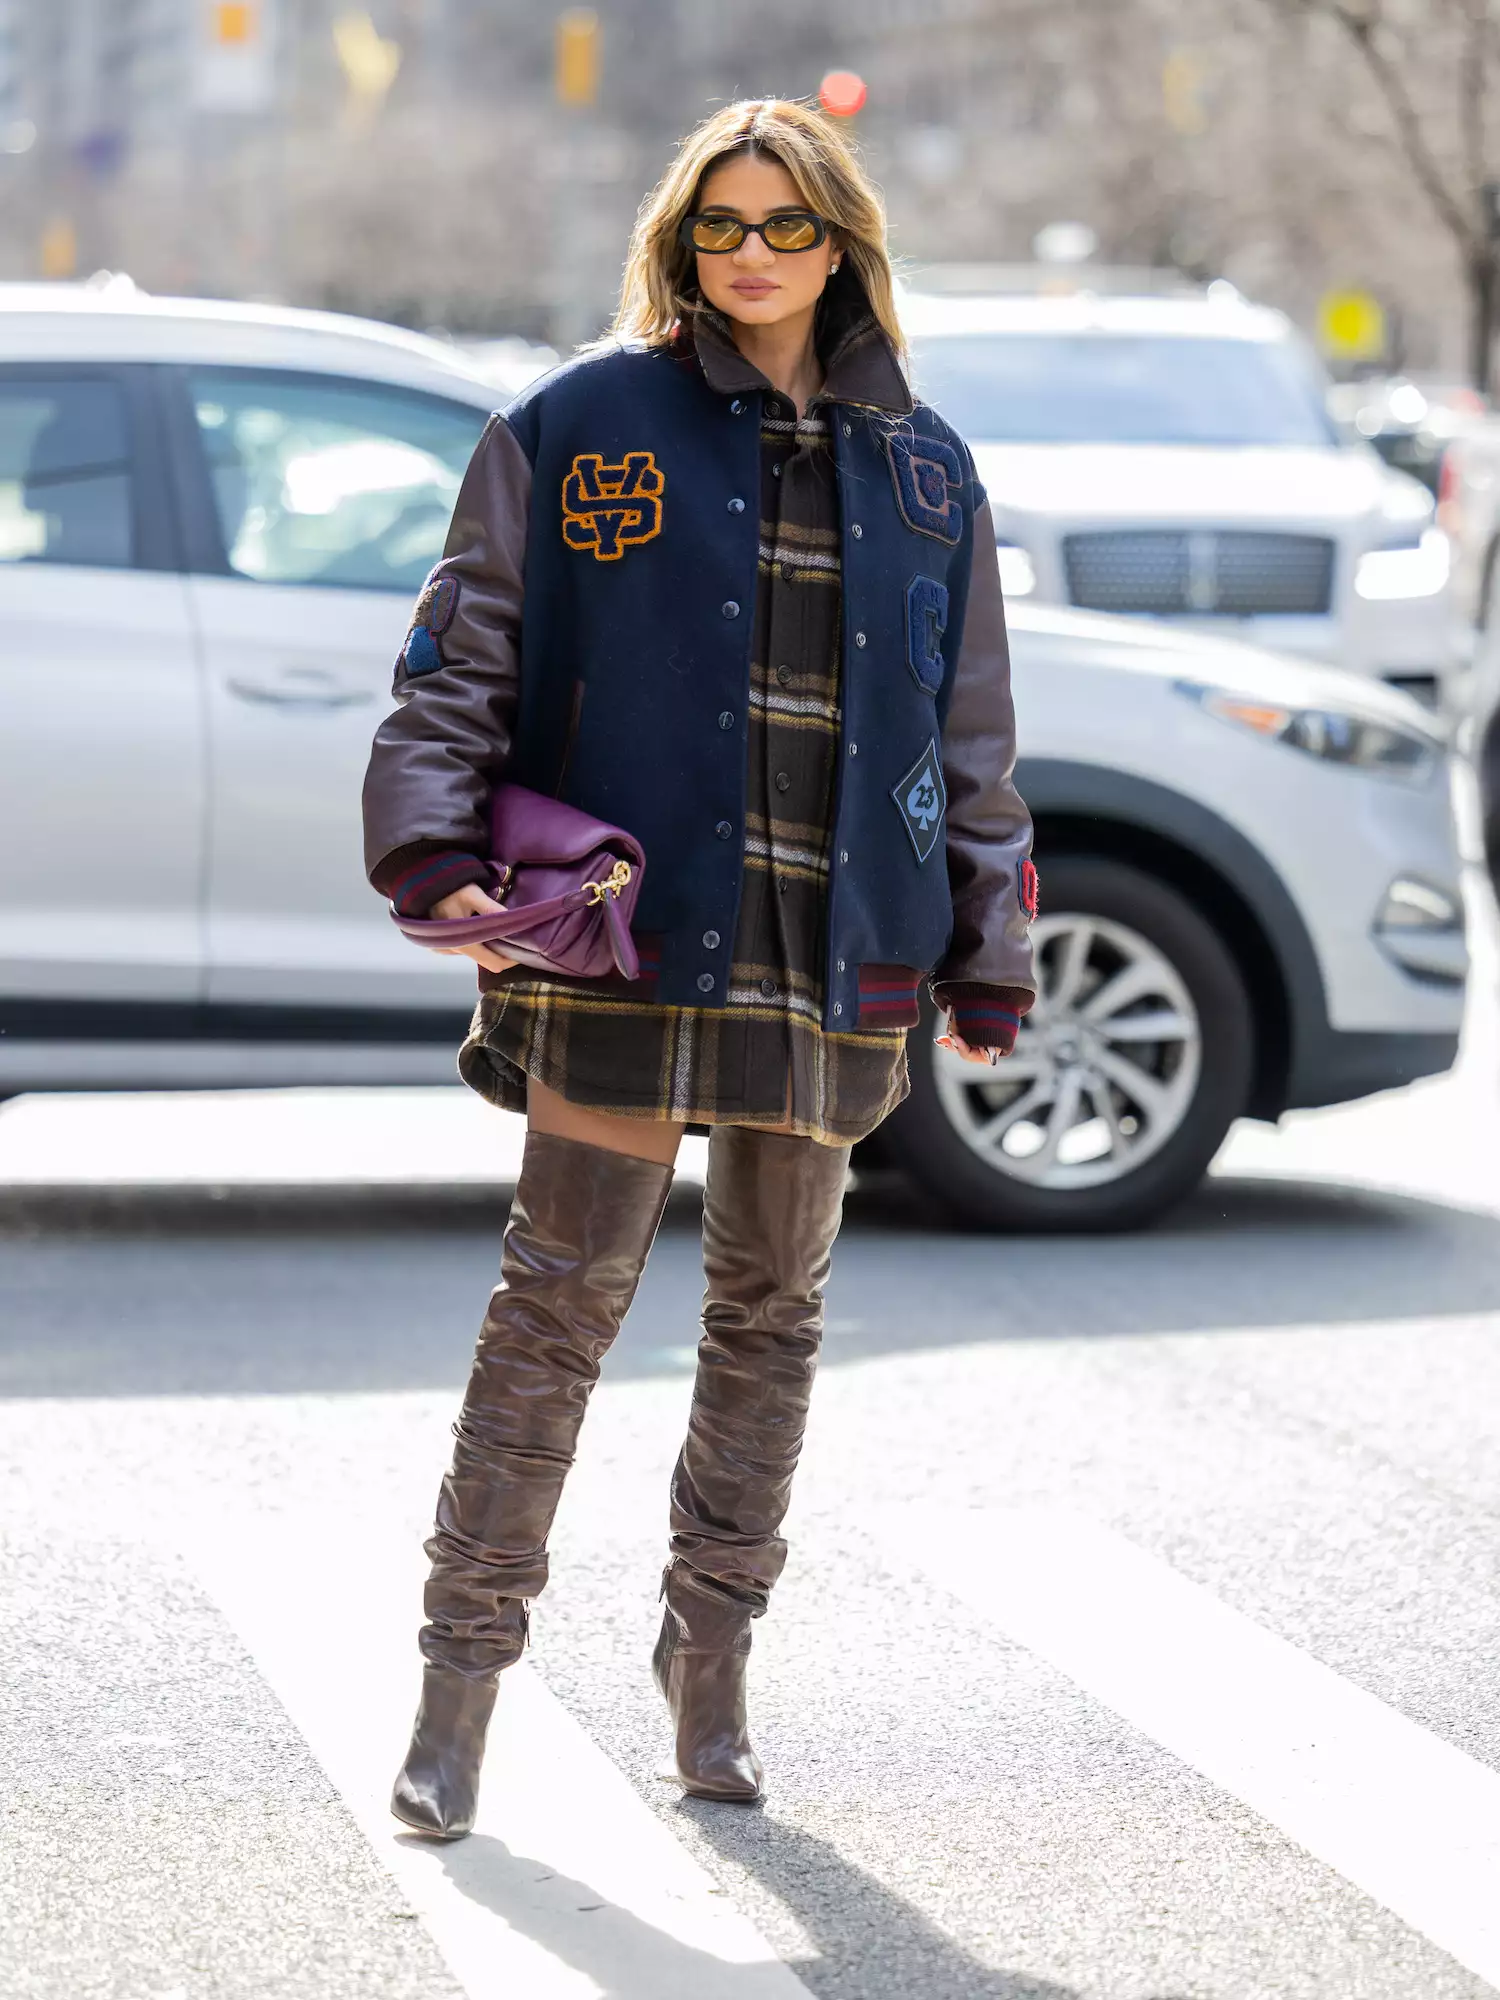 Thassia Naves wears a varsity jacket, plaid shacket, thigh-high boots, and purple bag